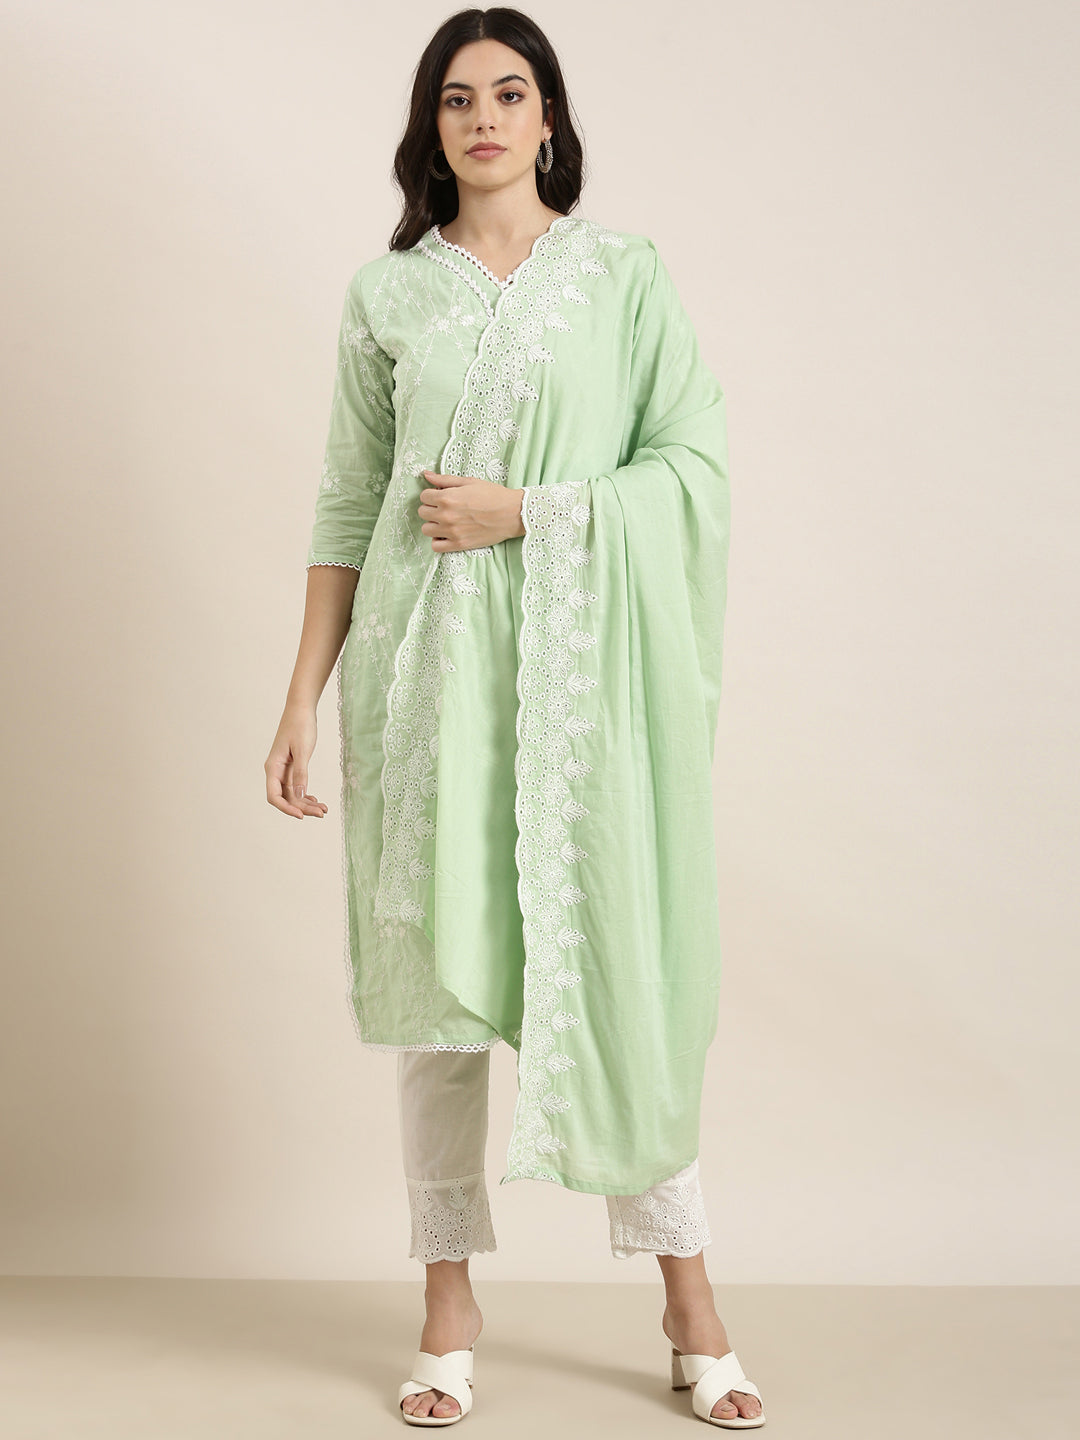 Women Straight Green Floral Kurta and Trousers Set Comes With Dupatta